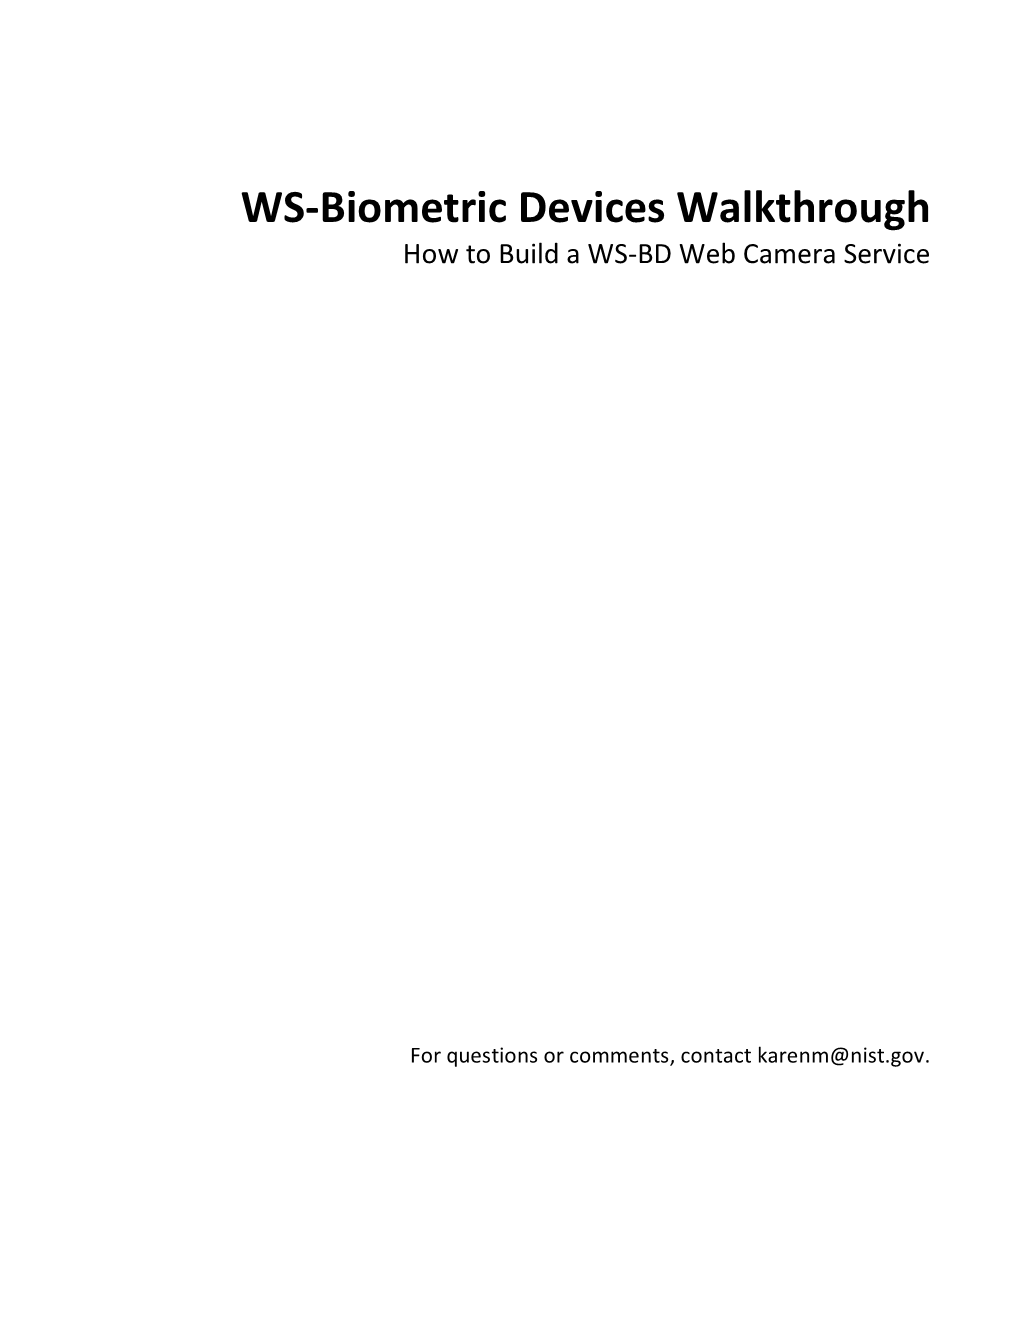 WS-Biometric Devices Walkthrough How to Build a WS-BD Web Camera Service